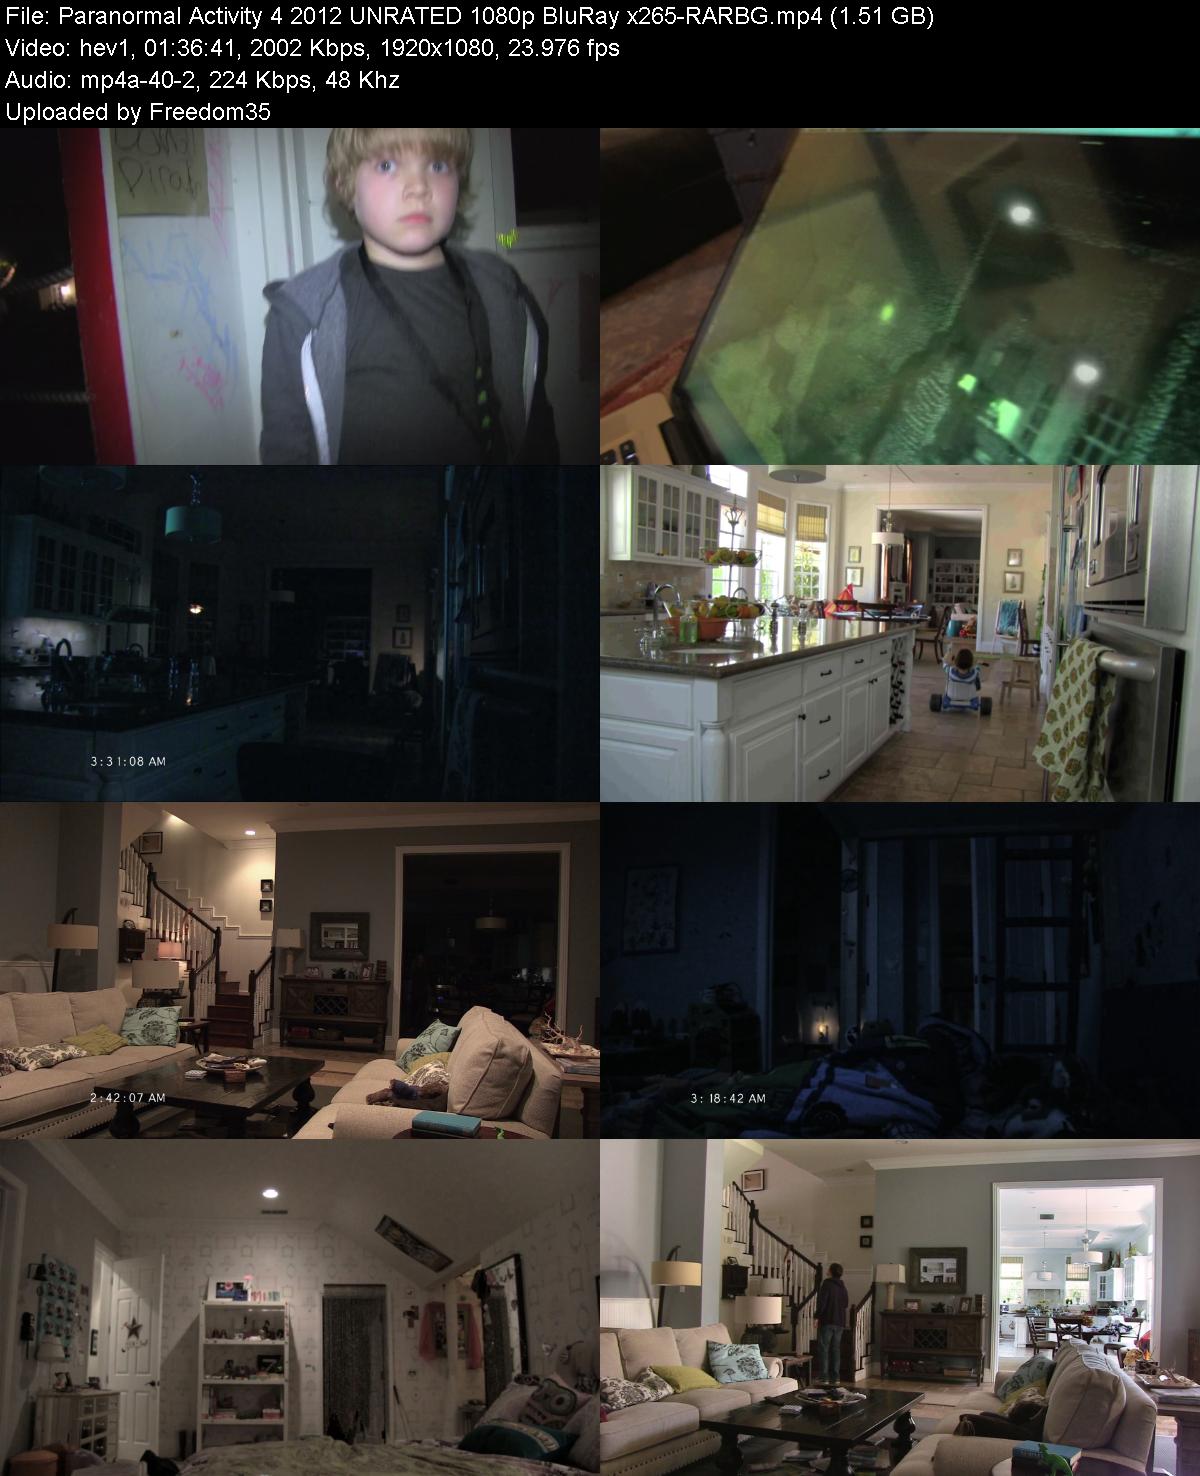 Paranormal-Activity-4-2012-UNRATED-1080p